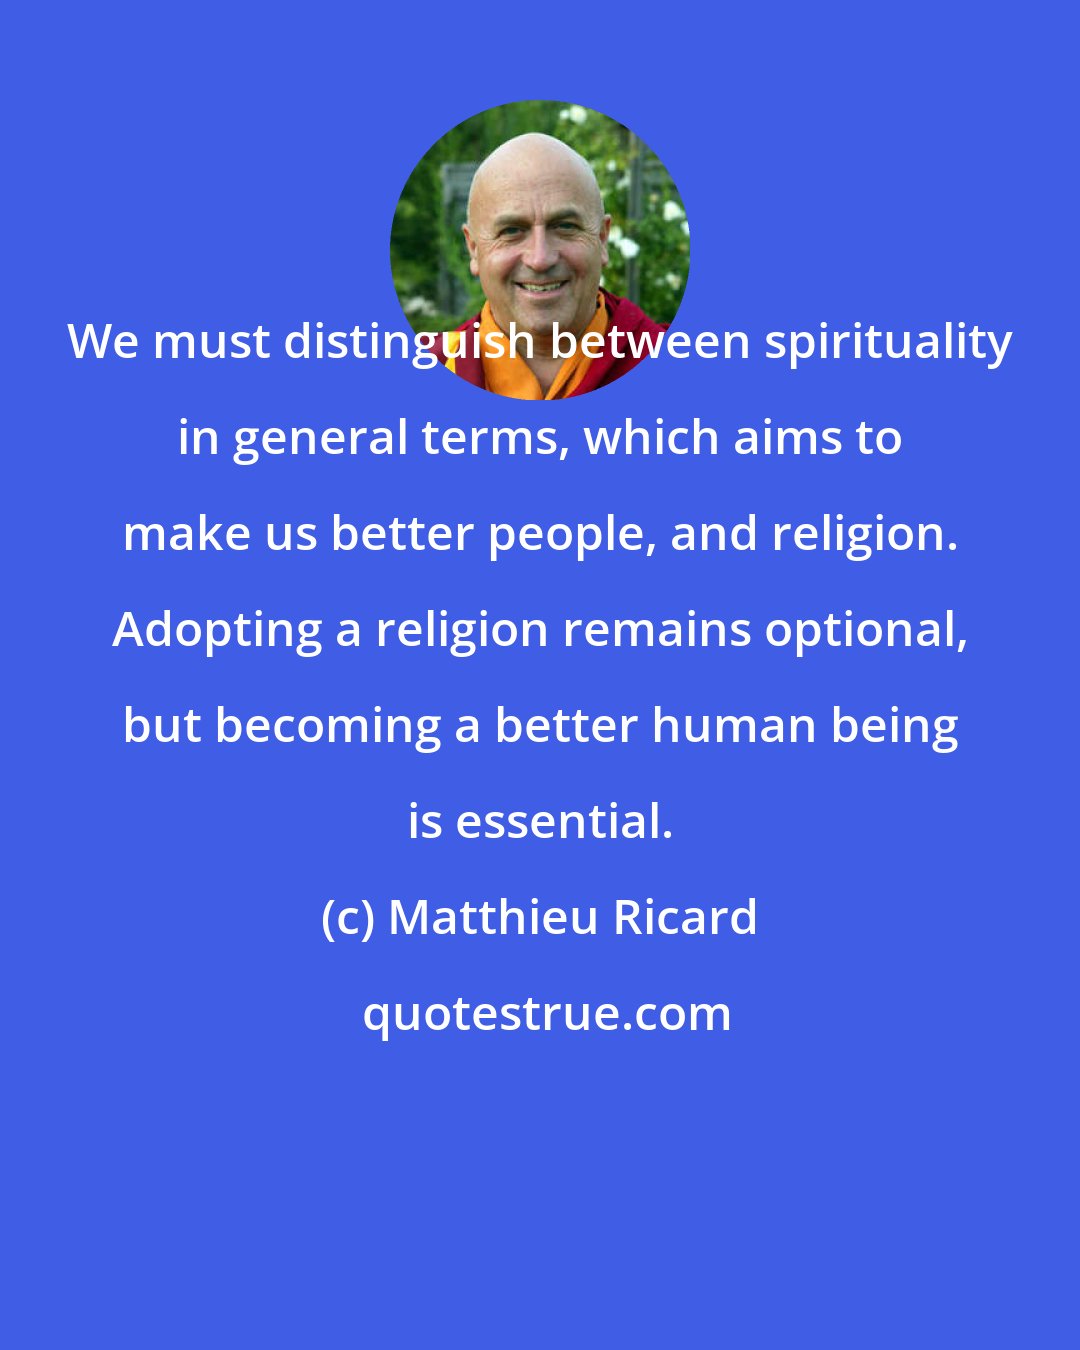 Matthieu Ricard: We must distinguish between spirituality in general terms, which aims to make us better people, and religion. Adopting a religion remains optional, but becoming a better human being is essential.